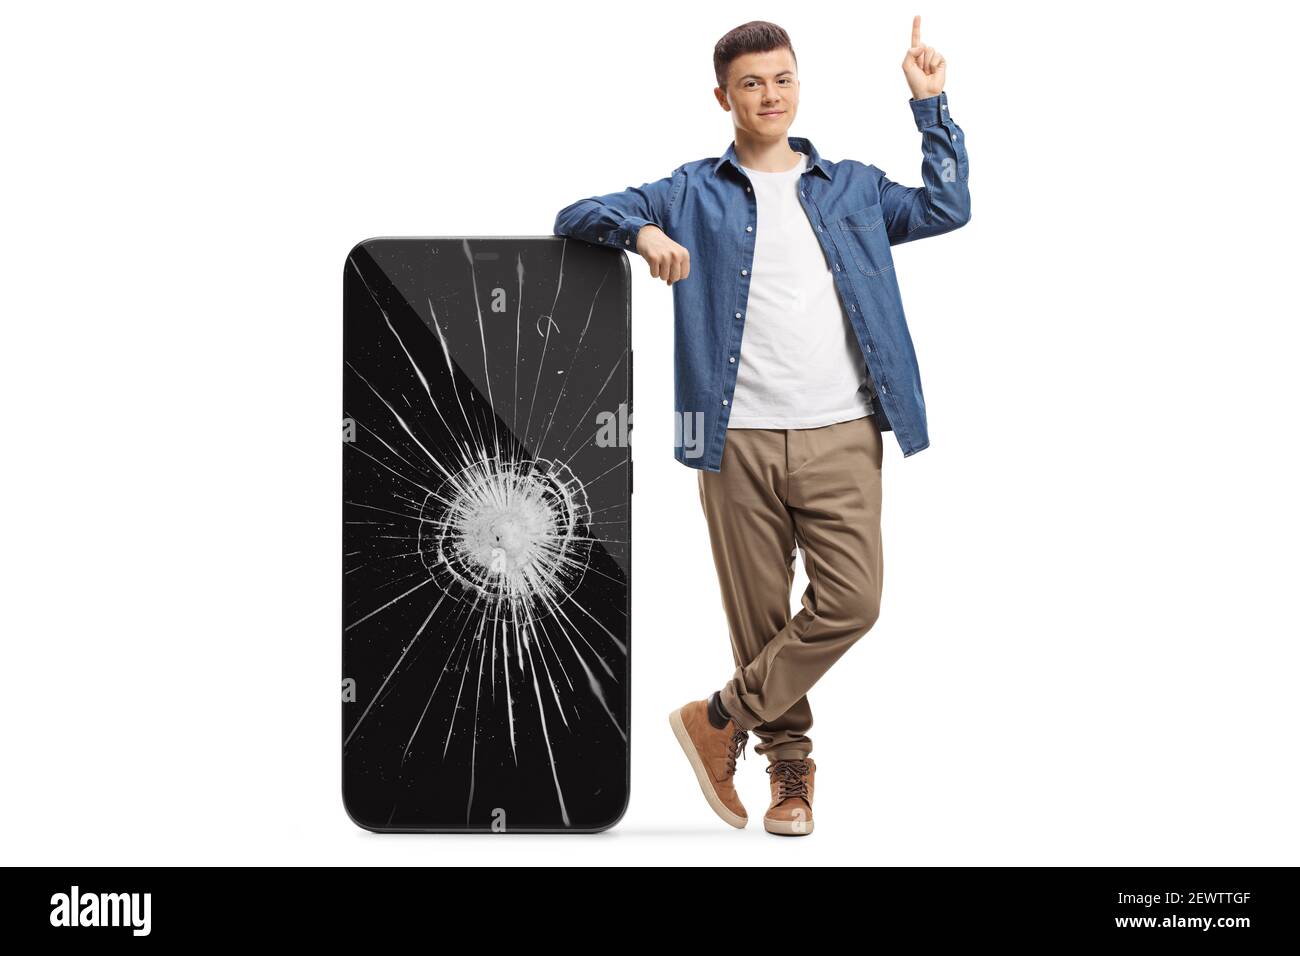 Full length portrait of a guy pointing up and posing with a big smartphone with cracked screen isolated on white background Stock Photo